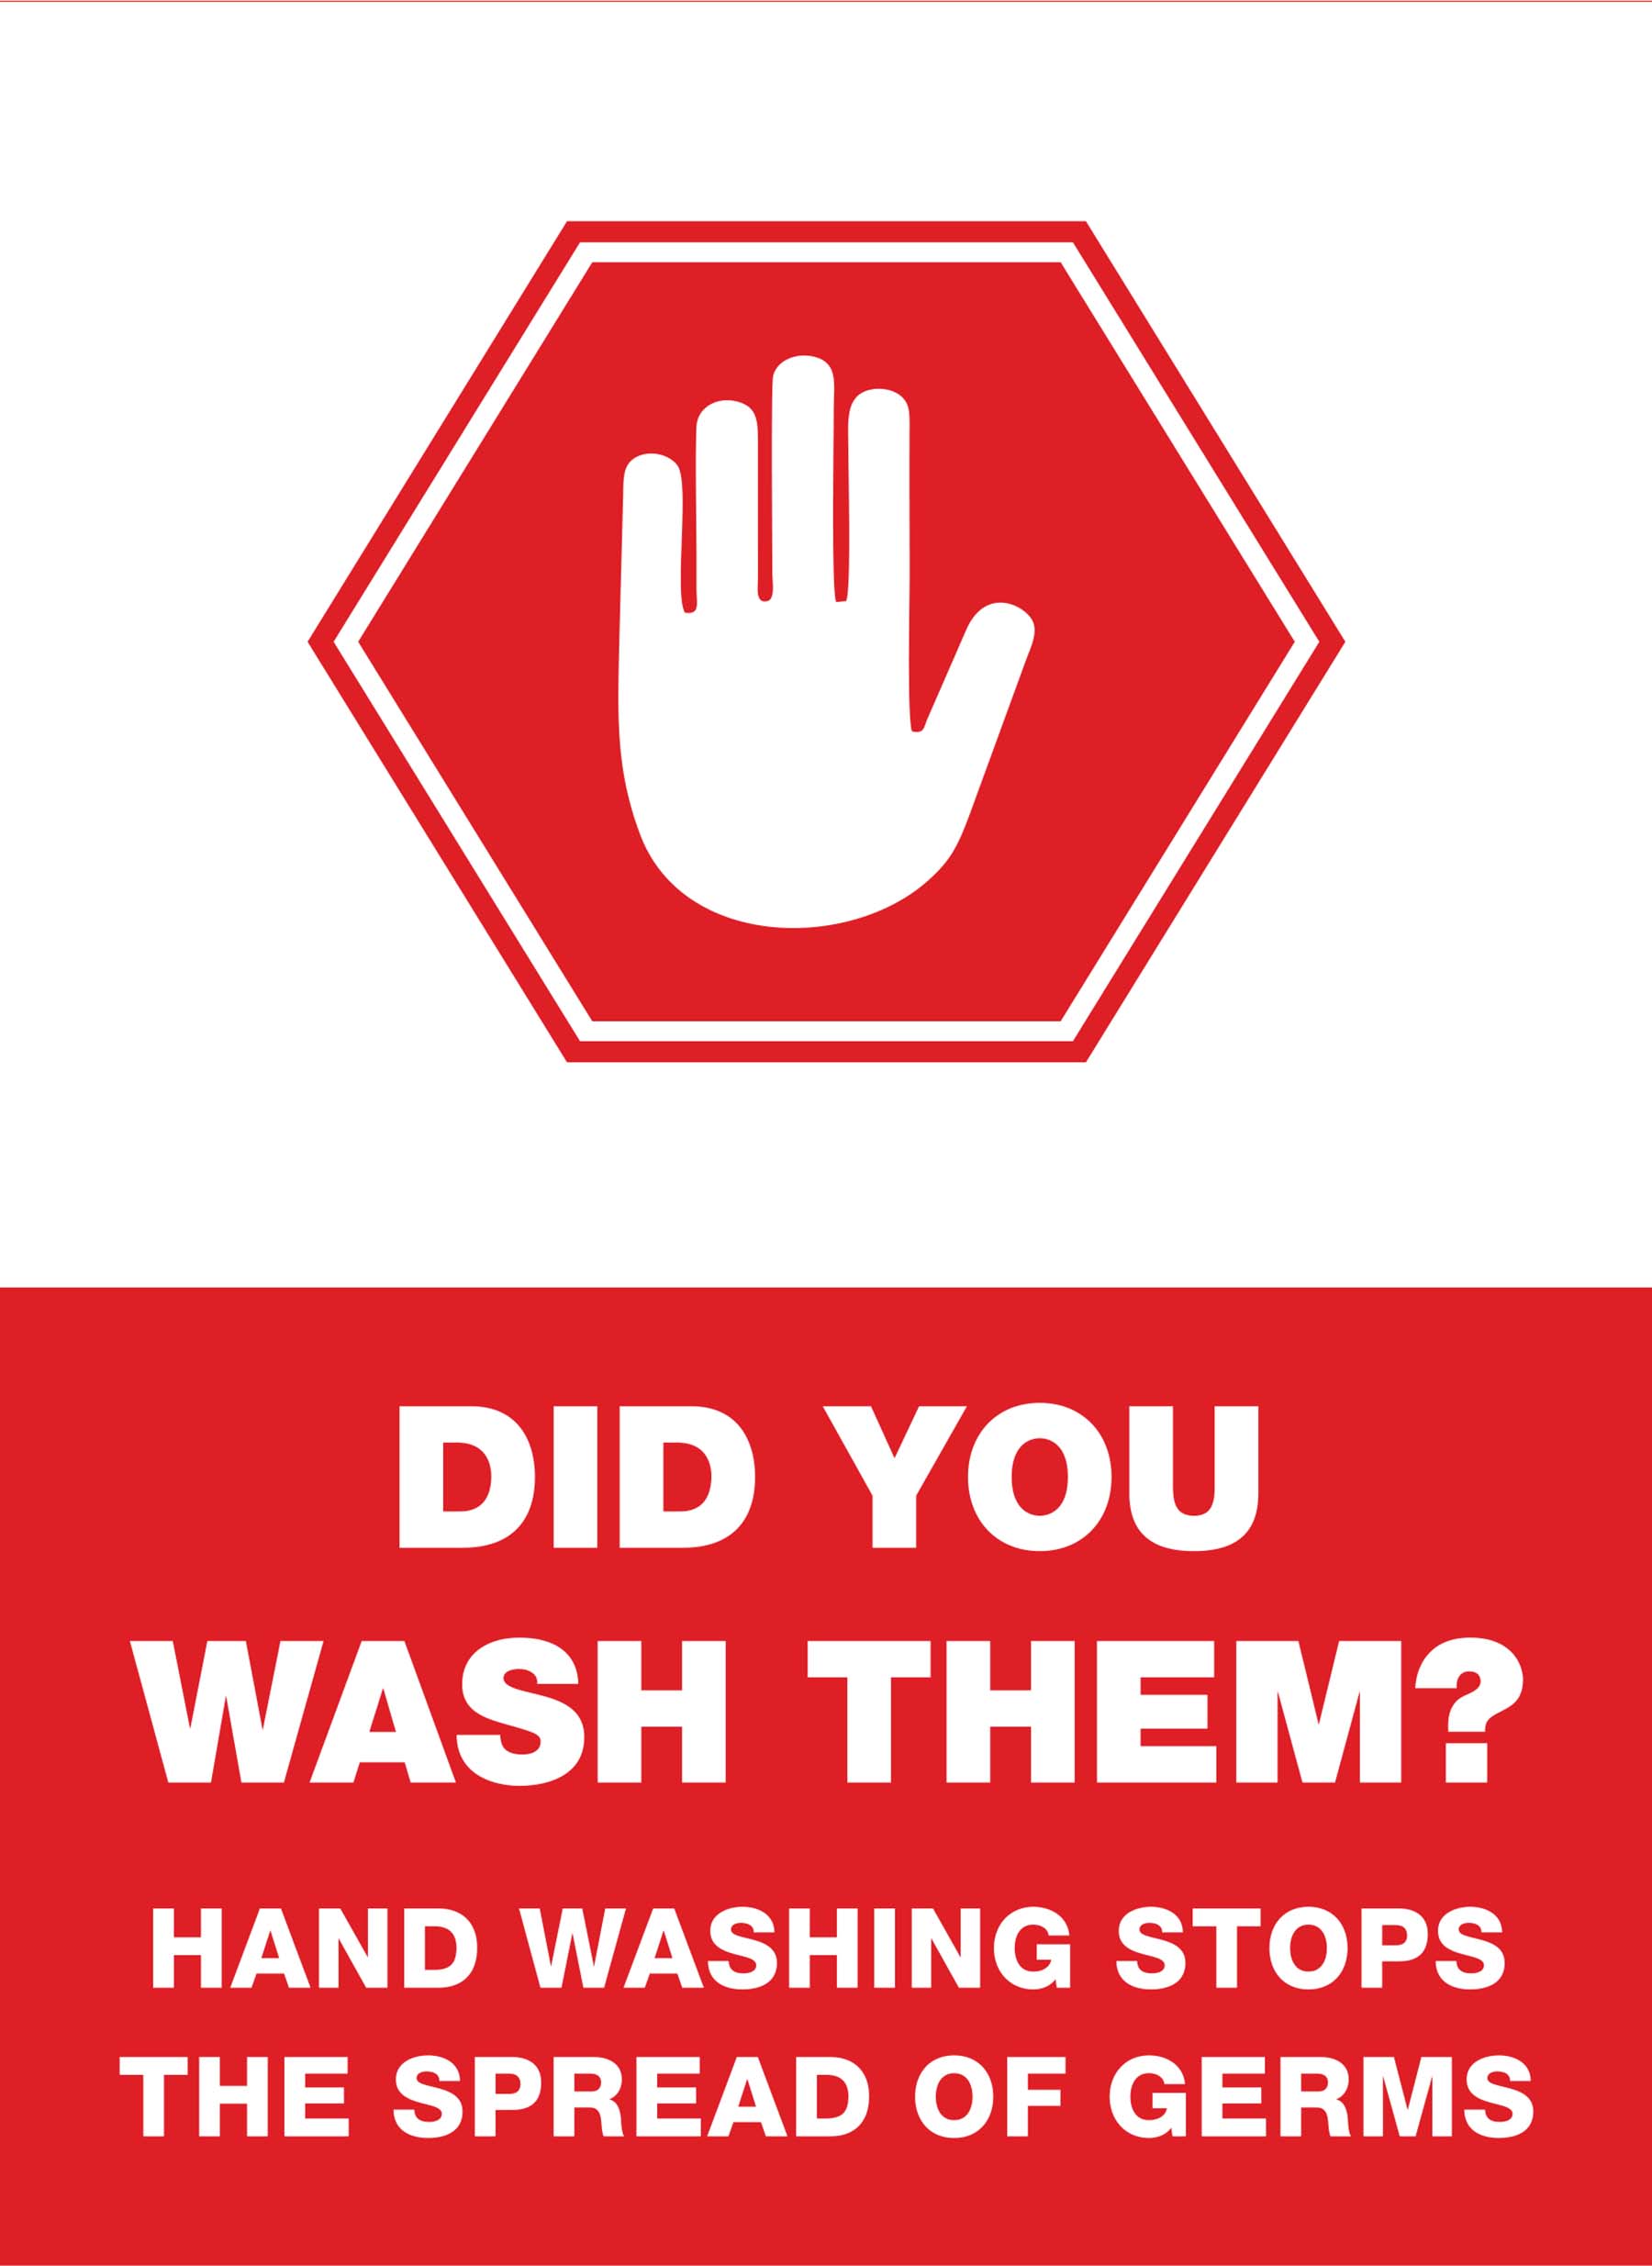 SD - Stop Wash Hands 6" x 8" Decal - 4 pack